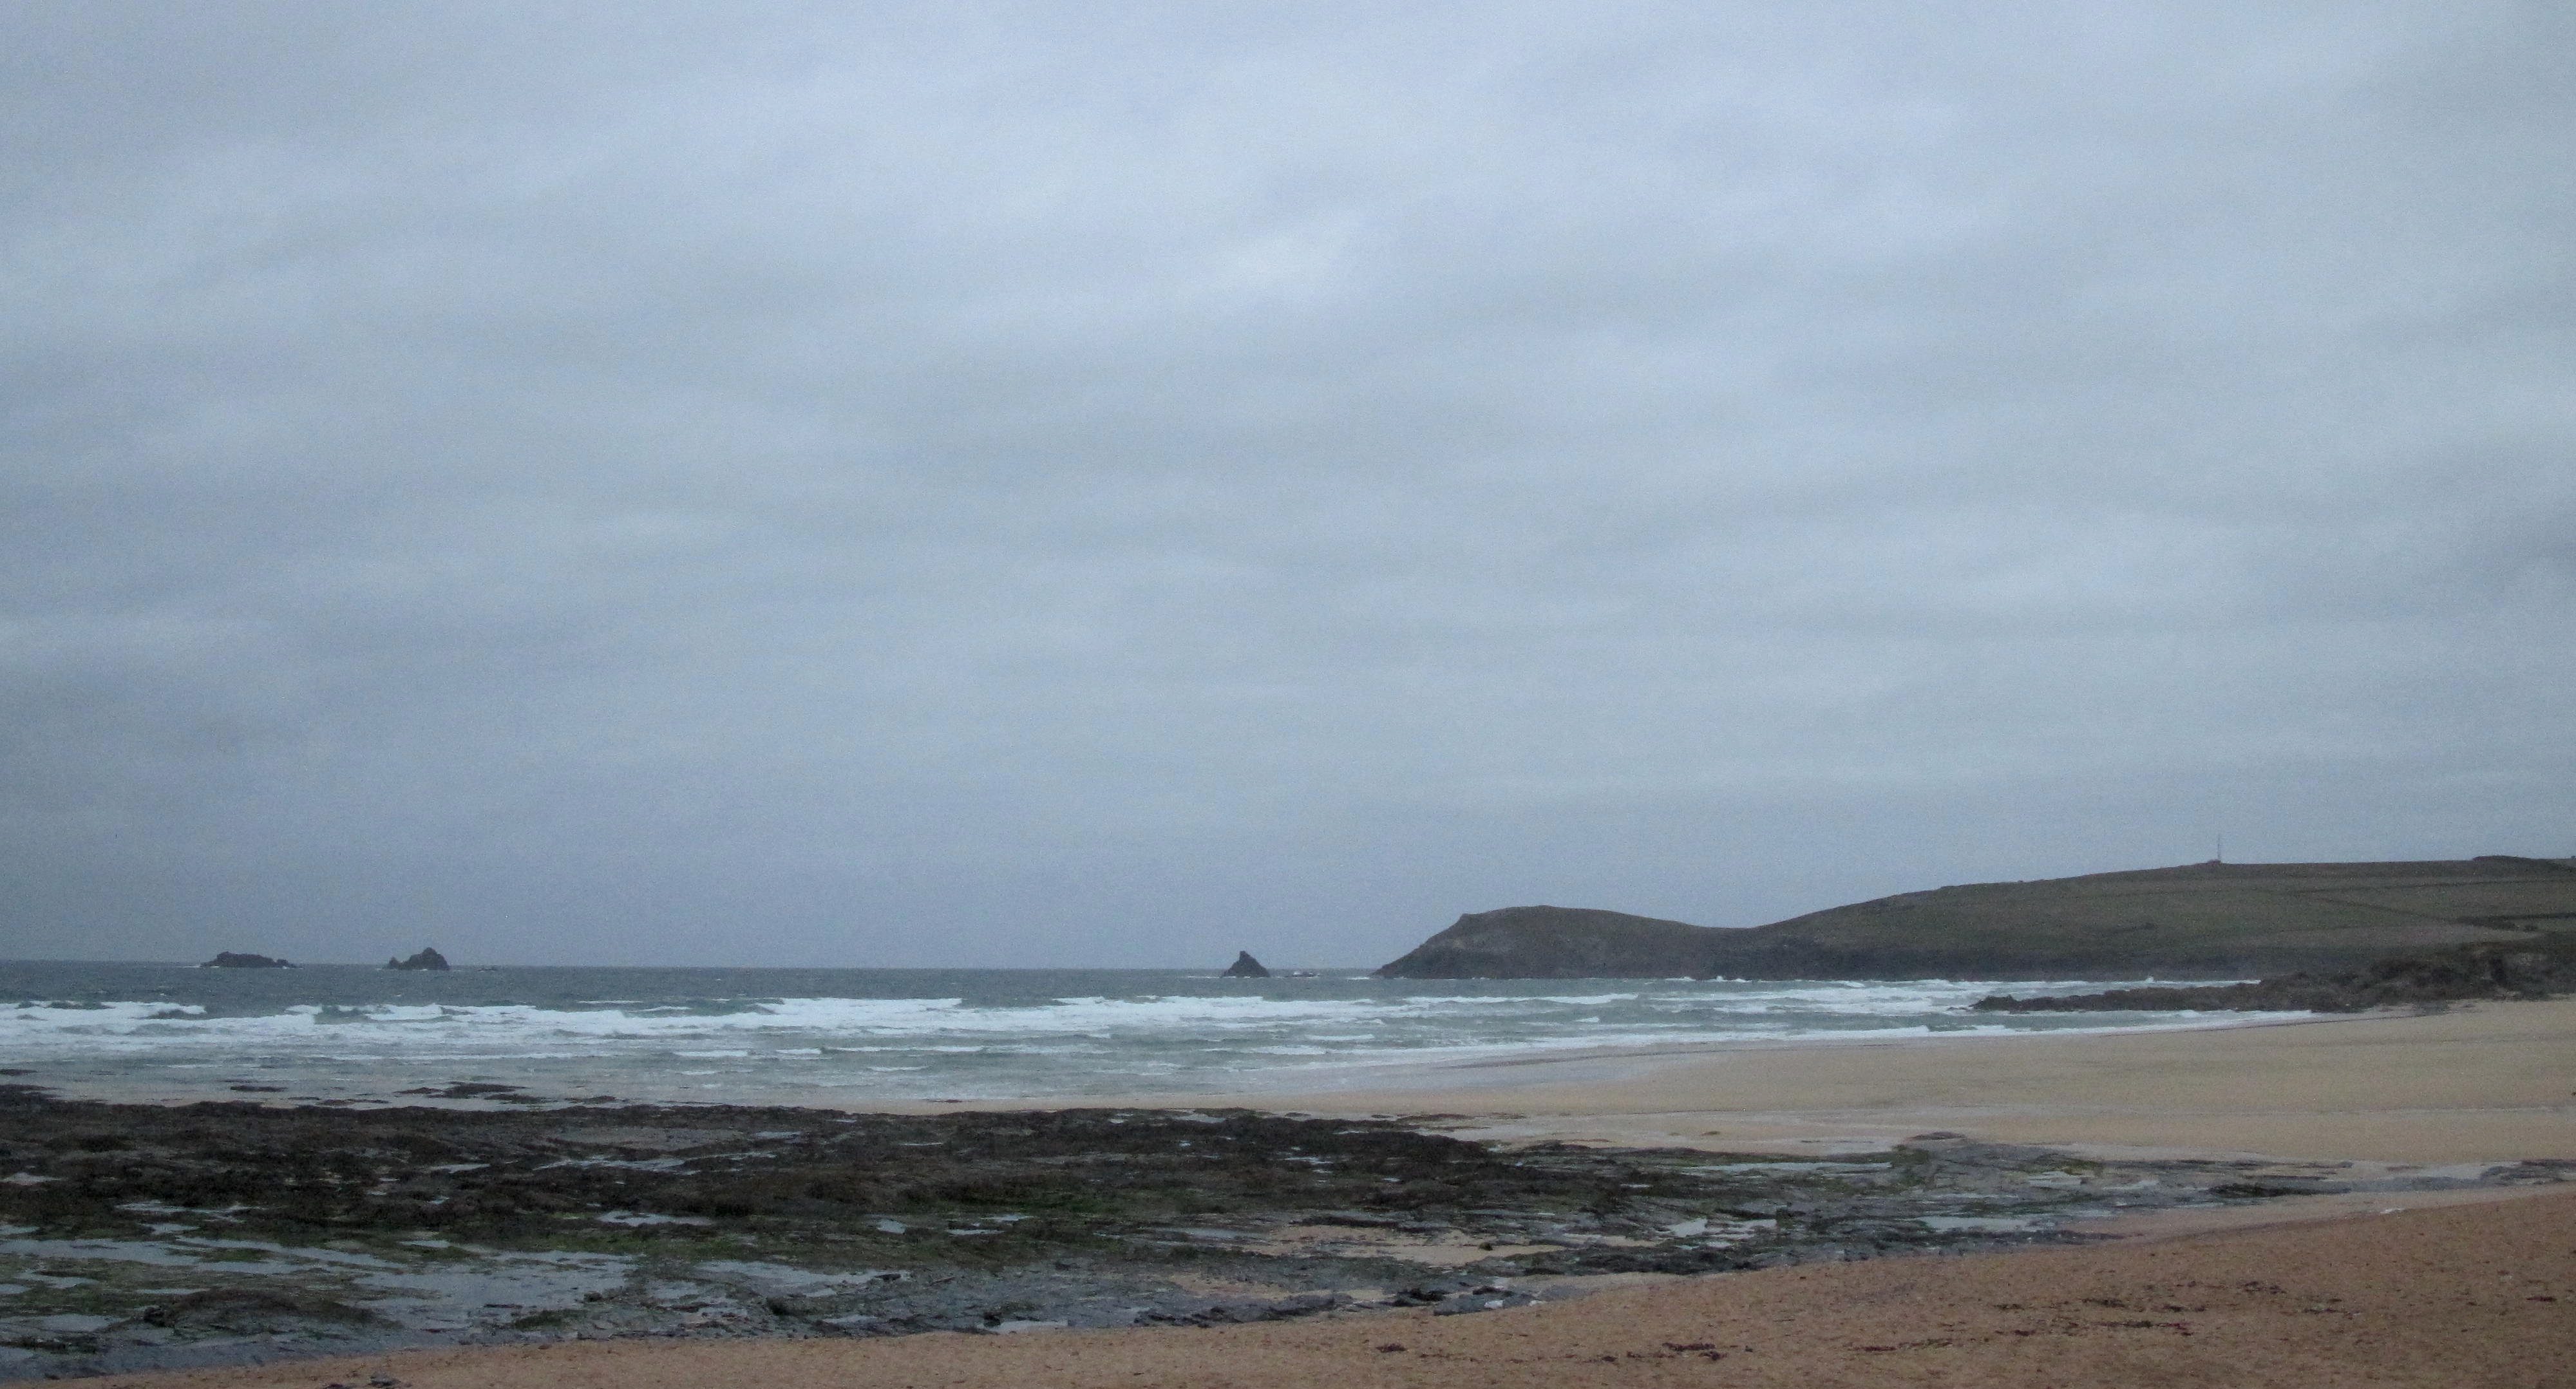 Surf Report for Thursday 22nd October 2015